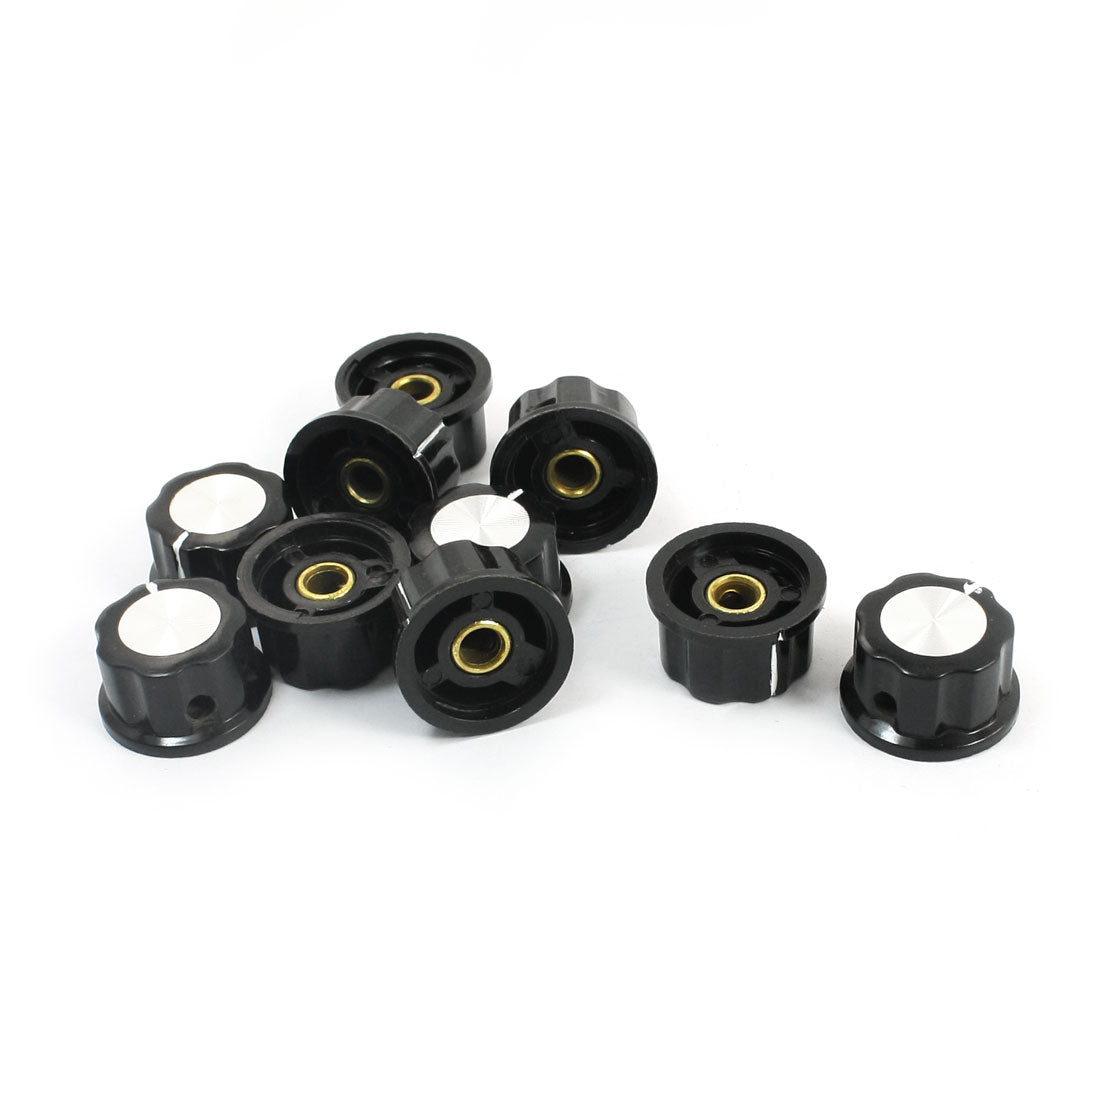 uxcell Uxcell 10pcs 6mm Round Shaft Insert Dia Plastic Potentiometer Knobs Caps Cover Hat Black Silver Tone